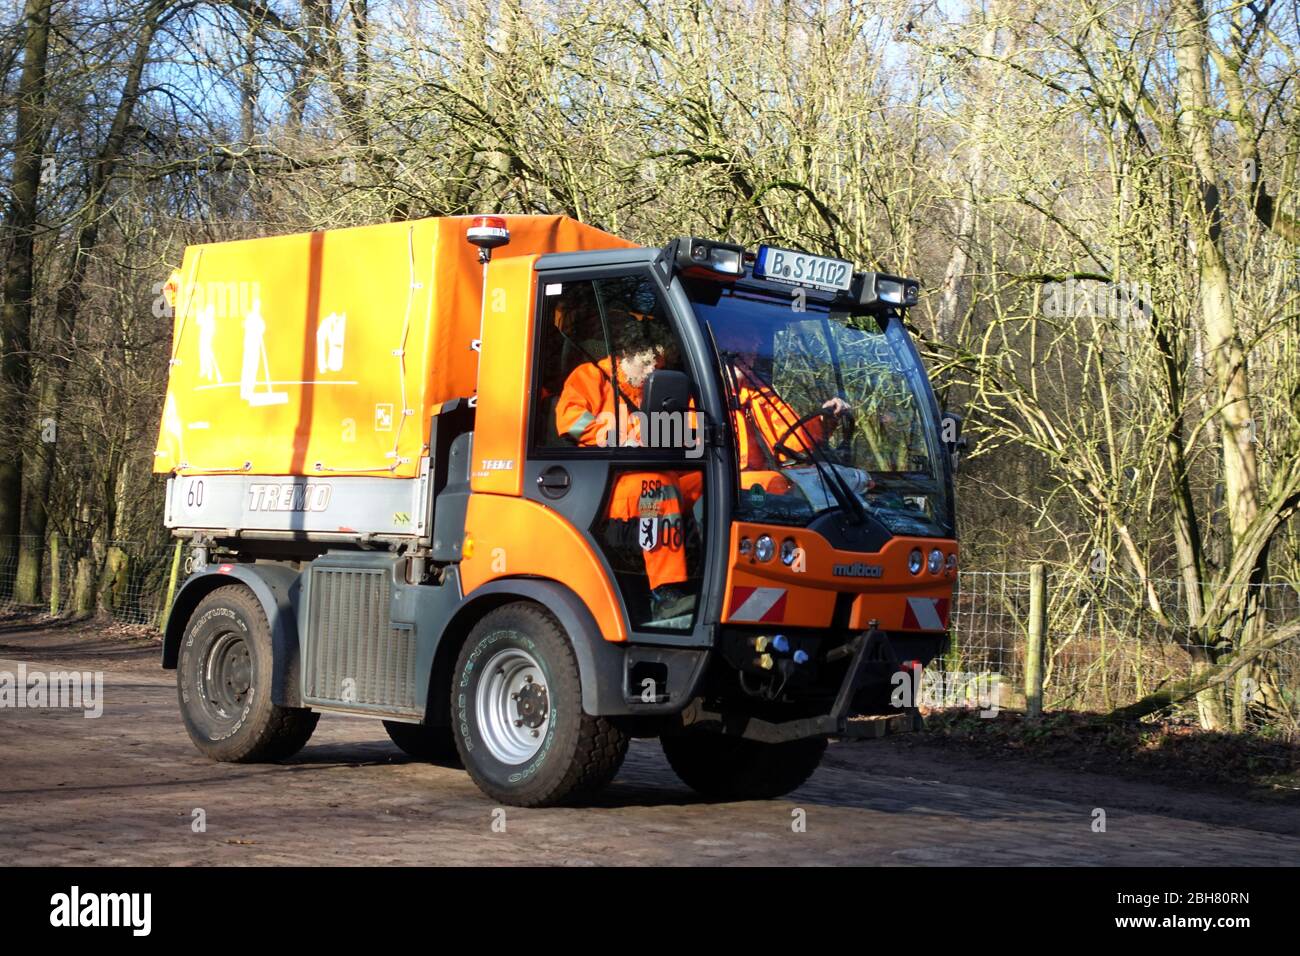 21.01.2020, Berlin, , Germany - Garbage truck of the Berlin city cleaning service in Grunewald. 00S200121D080CAROEX.JPG [MODEL RELEASE: NO, PROPERTY R Stock Photo